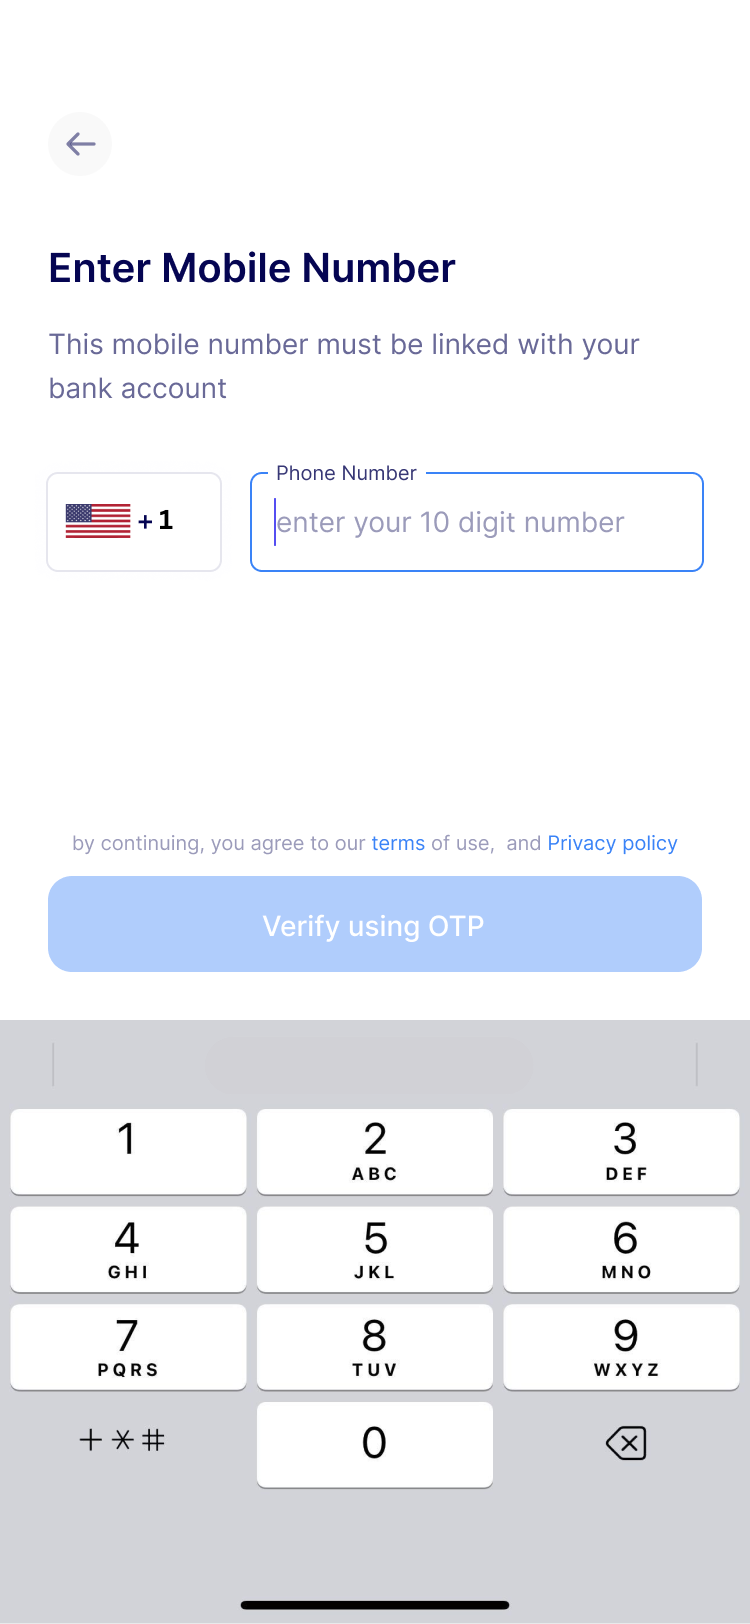 Verifying mobile phone numbers using OTP codes